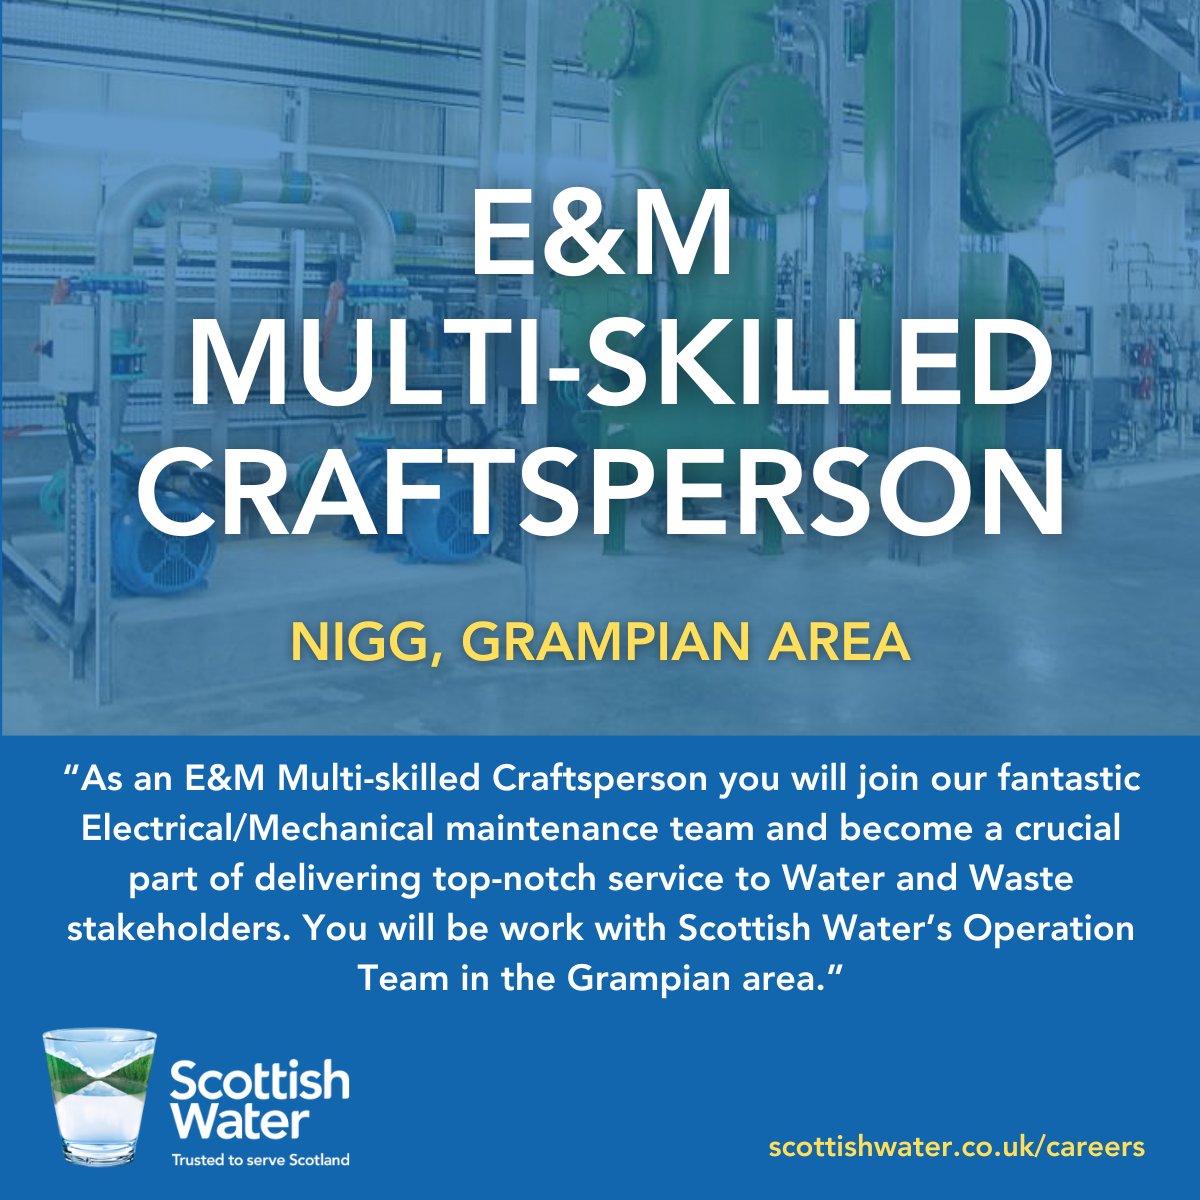 Join Scottish Water's Electrical & Mechanical maintenance team in Grampian, ensuring top-notch service for our water and waste stakeholders. Master mechanical skills, coordinate resources, and champion safety in this crucial role. bit.ly/3xvf9CQ #GrampianJobs